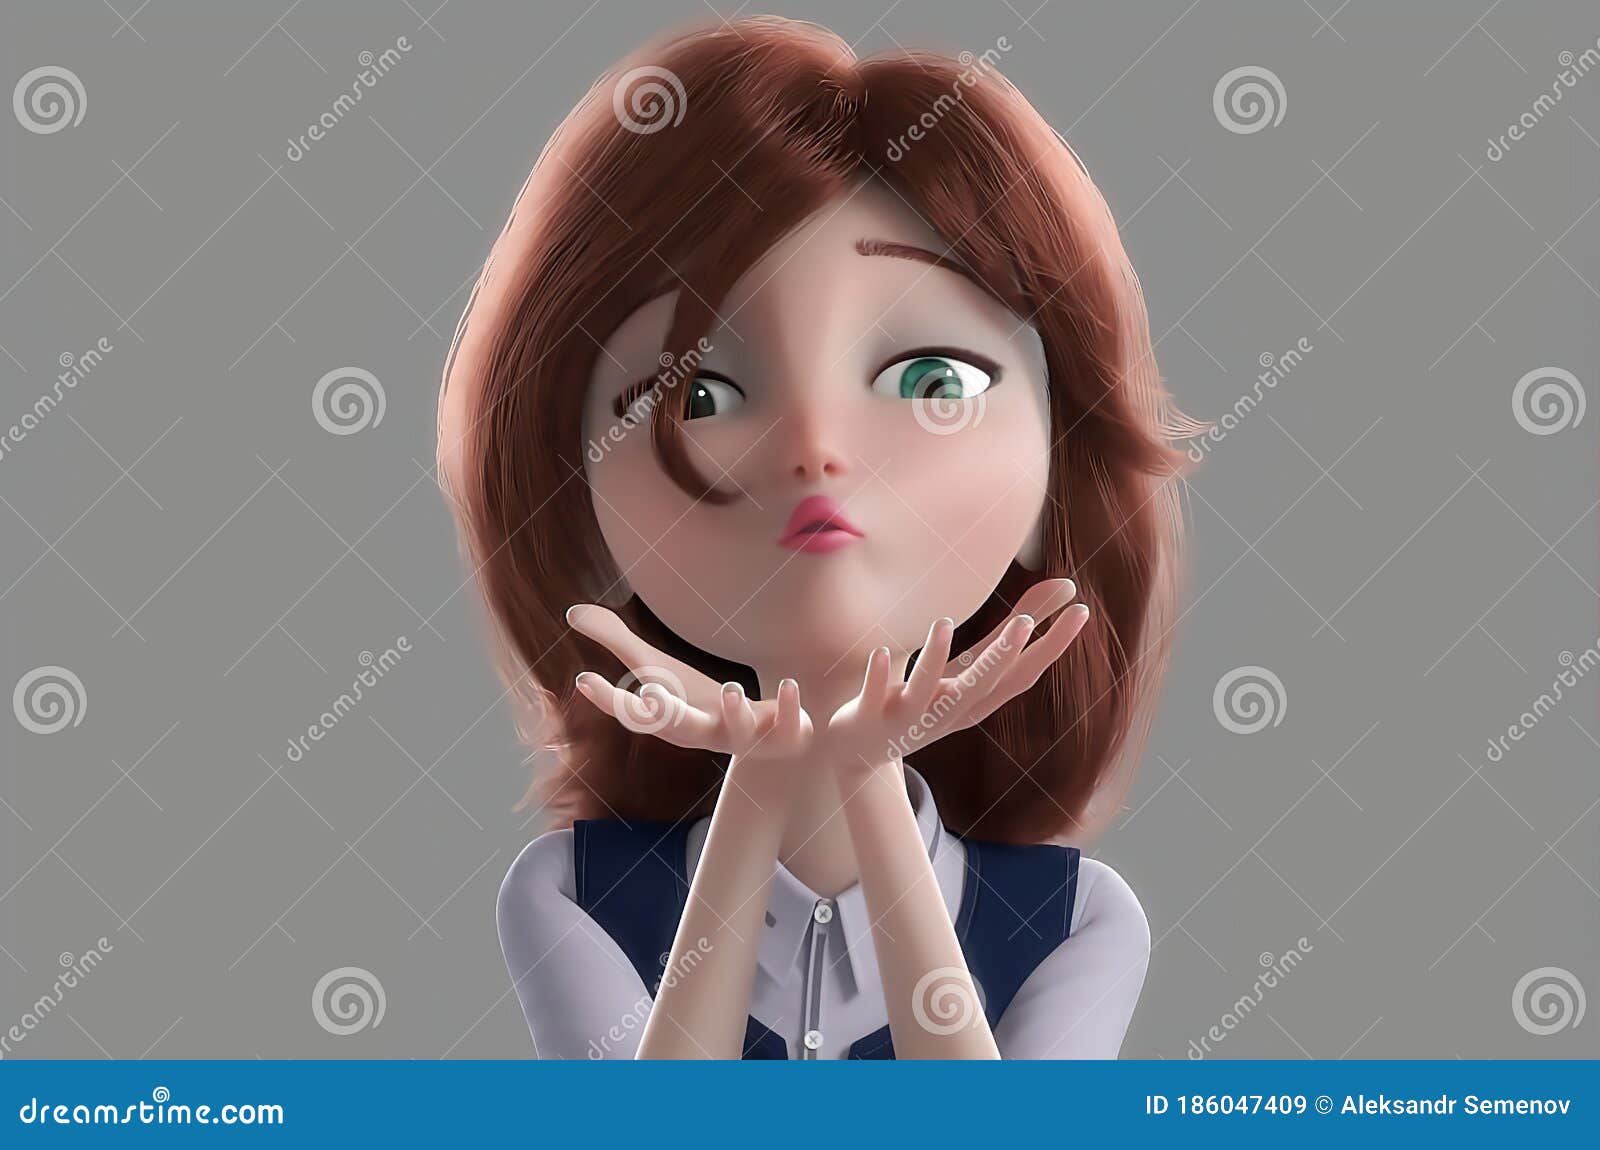 Beautiful Young Cartoon 3d Woman with Green Eyes Sends You a Kiss 0090  Stock Illustration - Illustration of attractive, glamour: 186047409